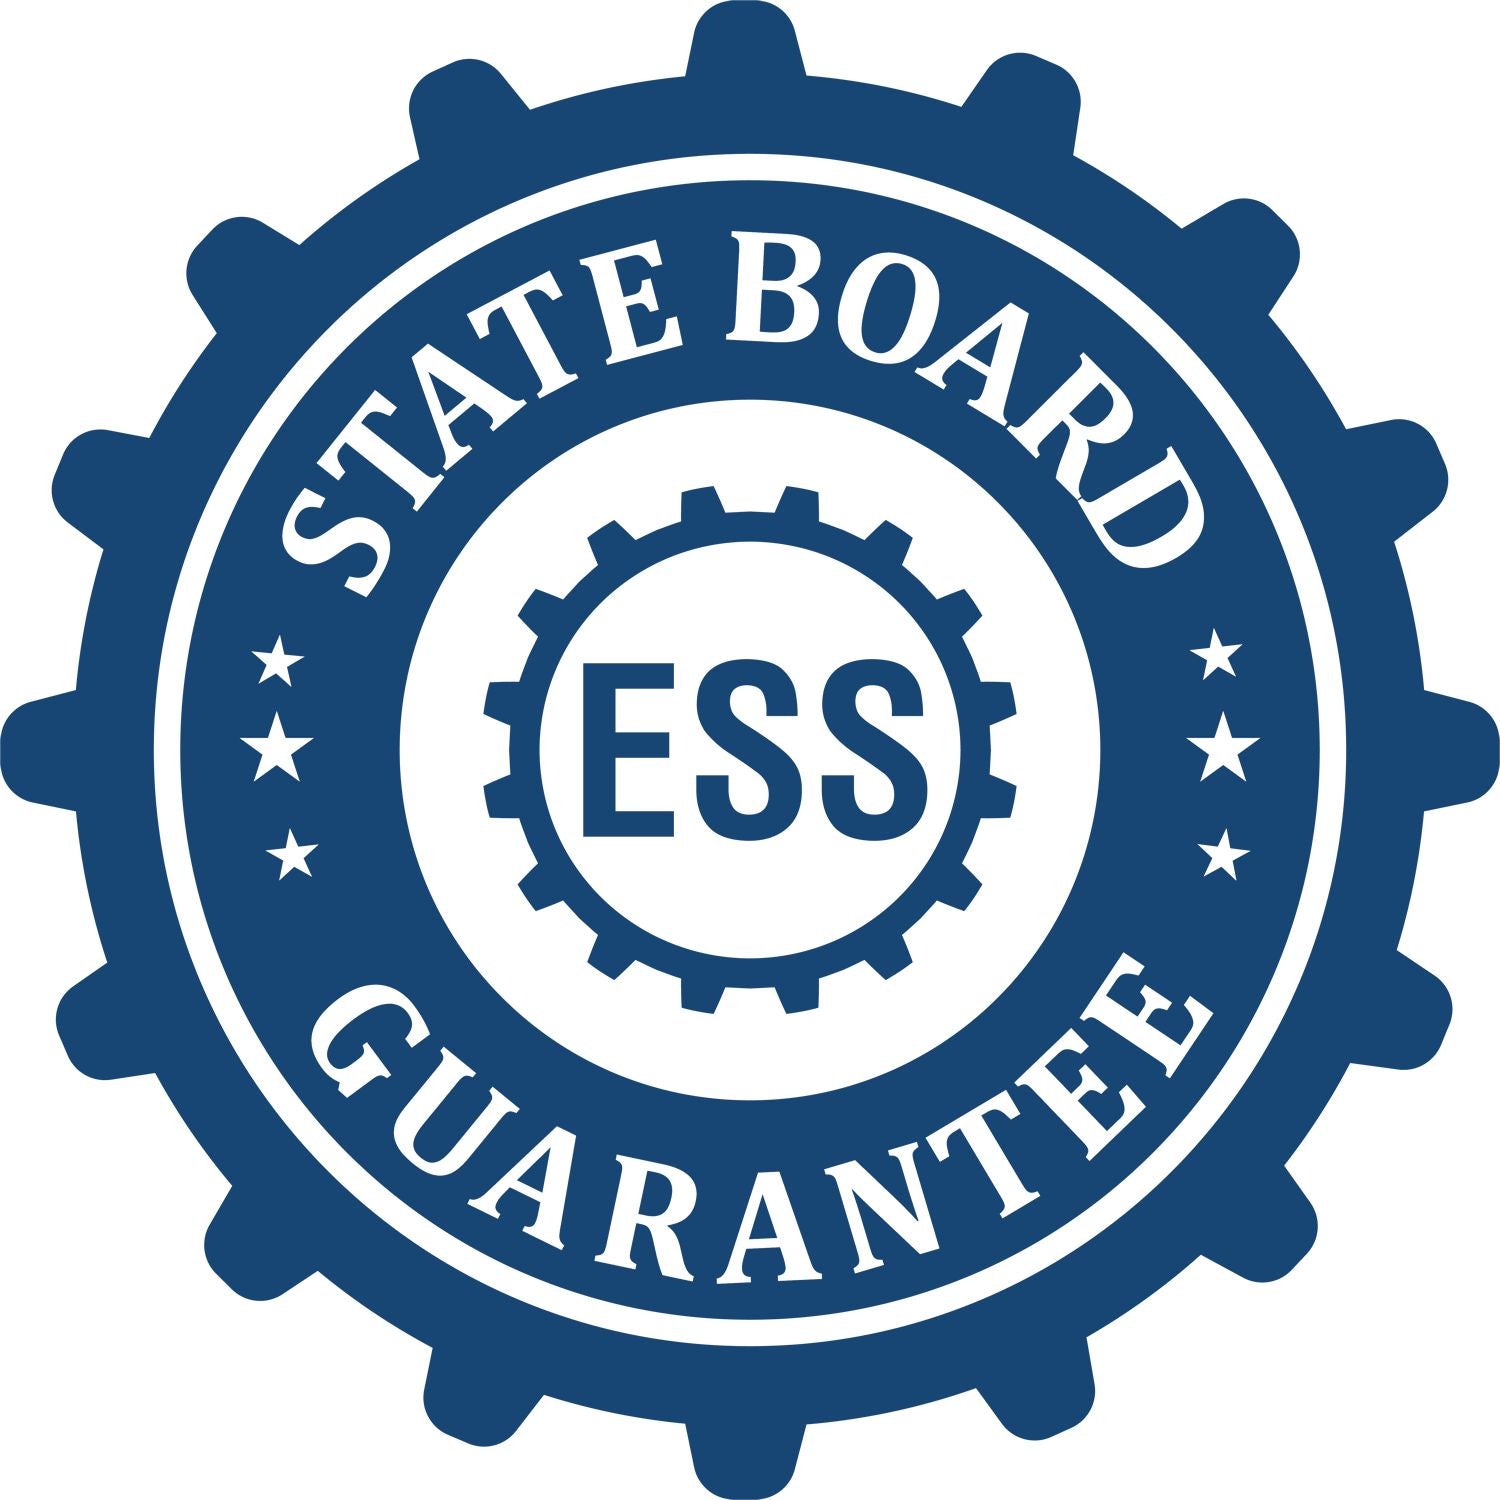 An emblem in a gear shape illustrating a state board guarantee for the Premium MaxLight Pre-Inked District of Columbia Engineering Stamp product.